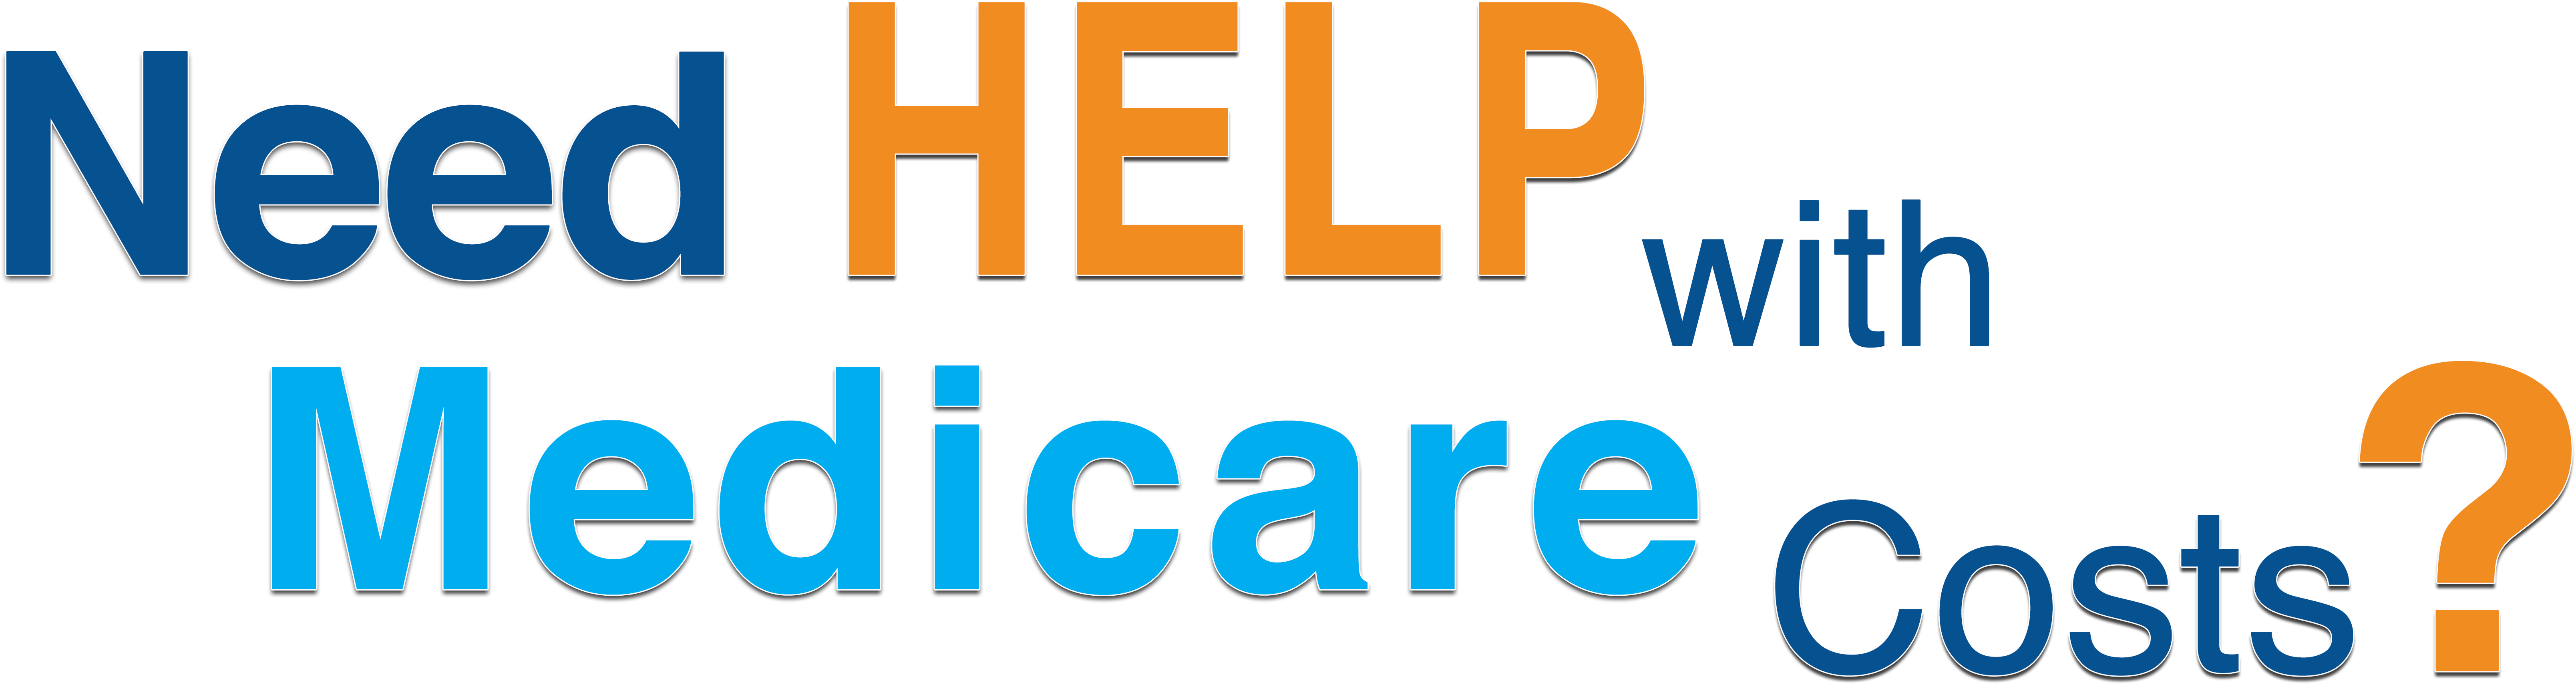 Need Help with Medicare Costs?